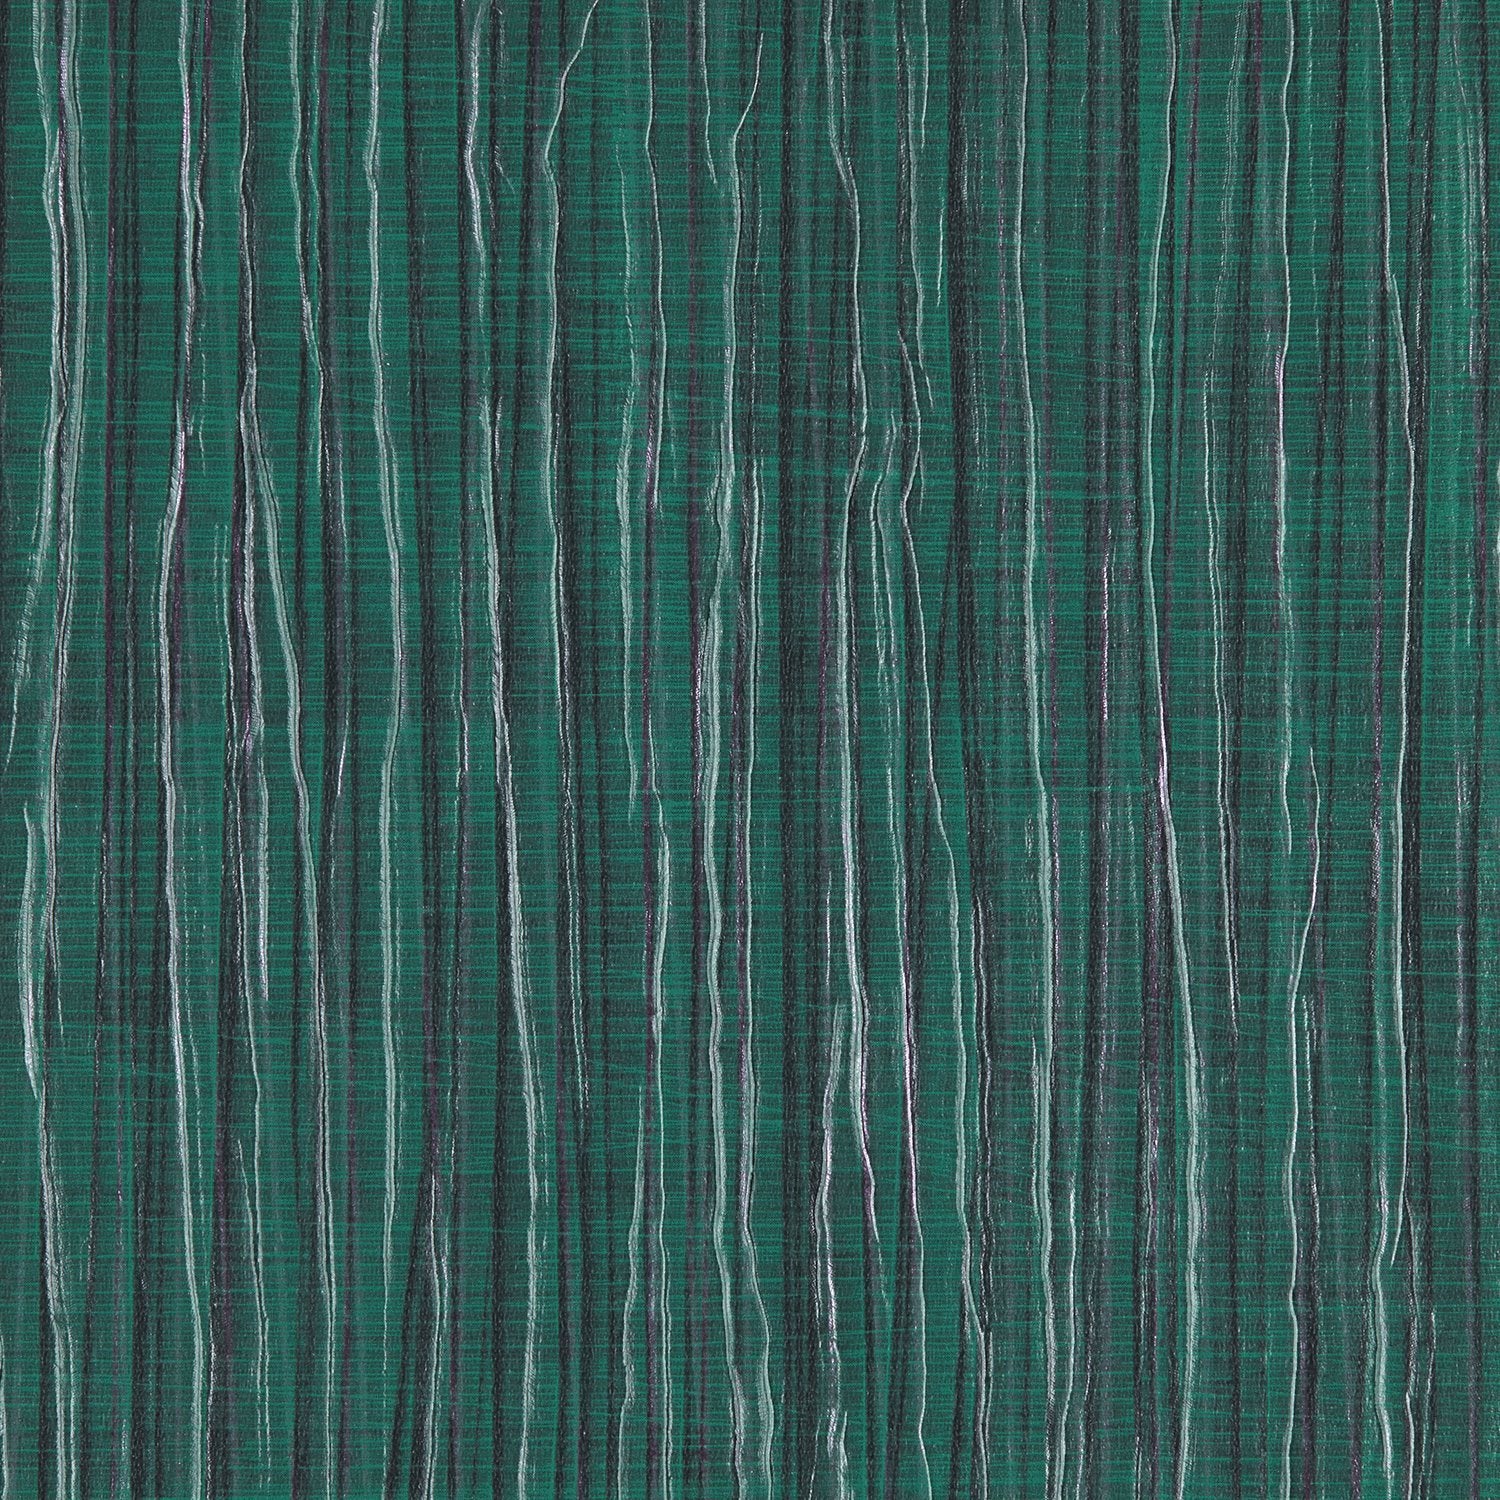 Vogue Pleat - Y47008 - Wallcovering - Vycon - Kube Contract